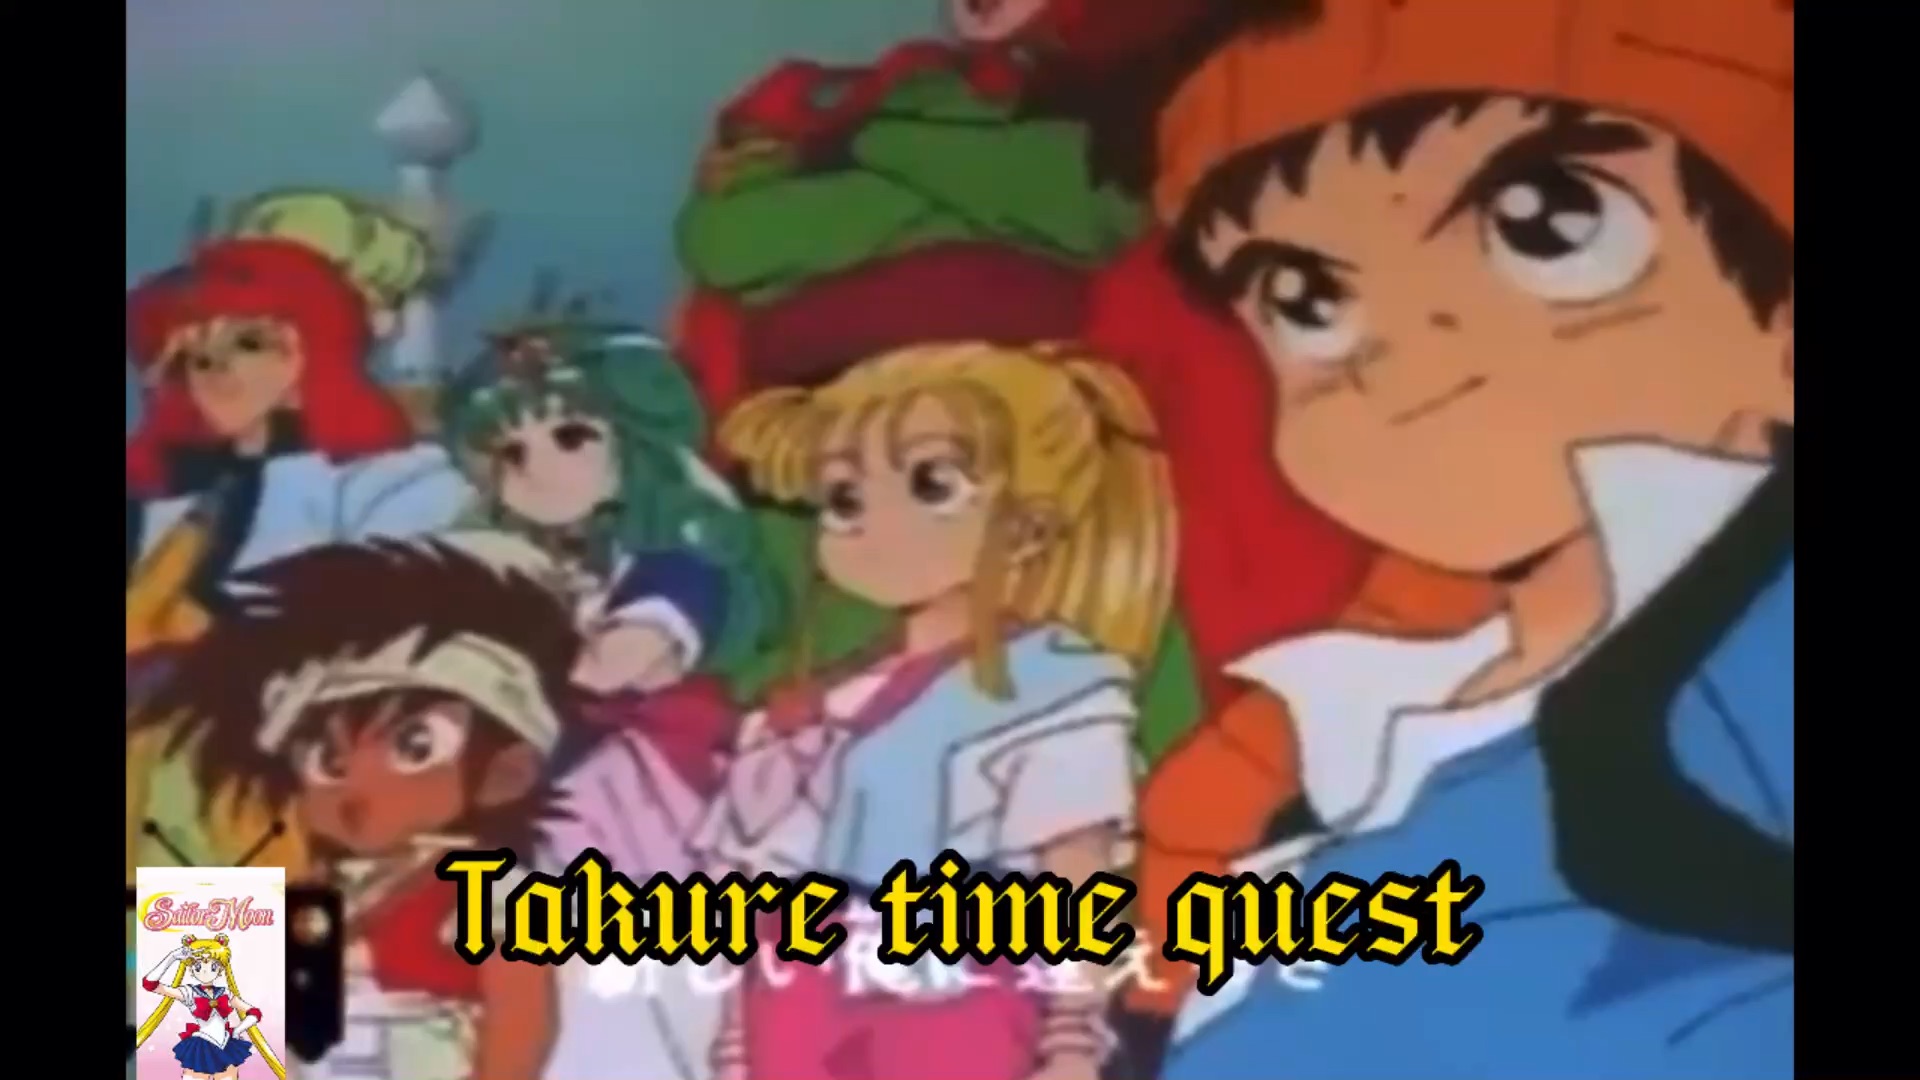 Time Quest. The anime that taught me world history - i forgot all about it  now. Haha. Though i do remember the genie with the… | Anime, Old cartoons,  Animation film